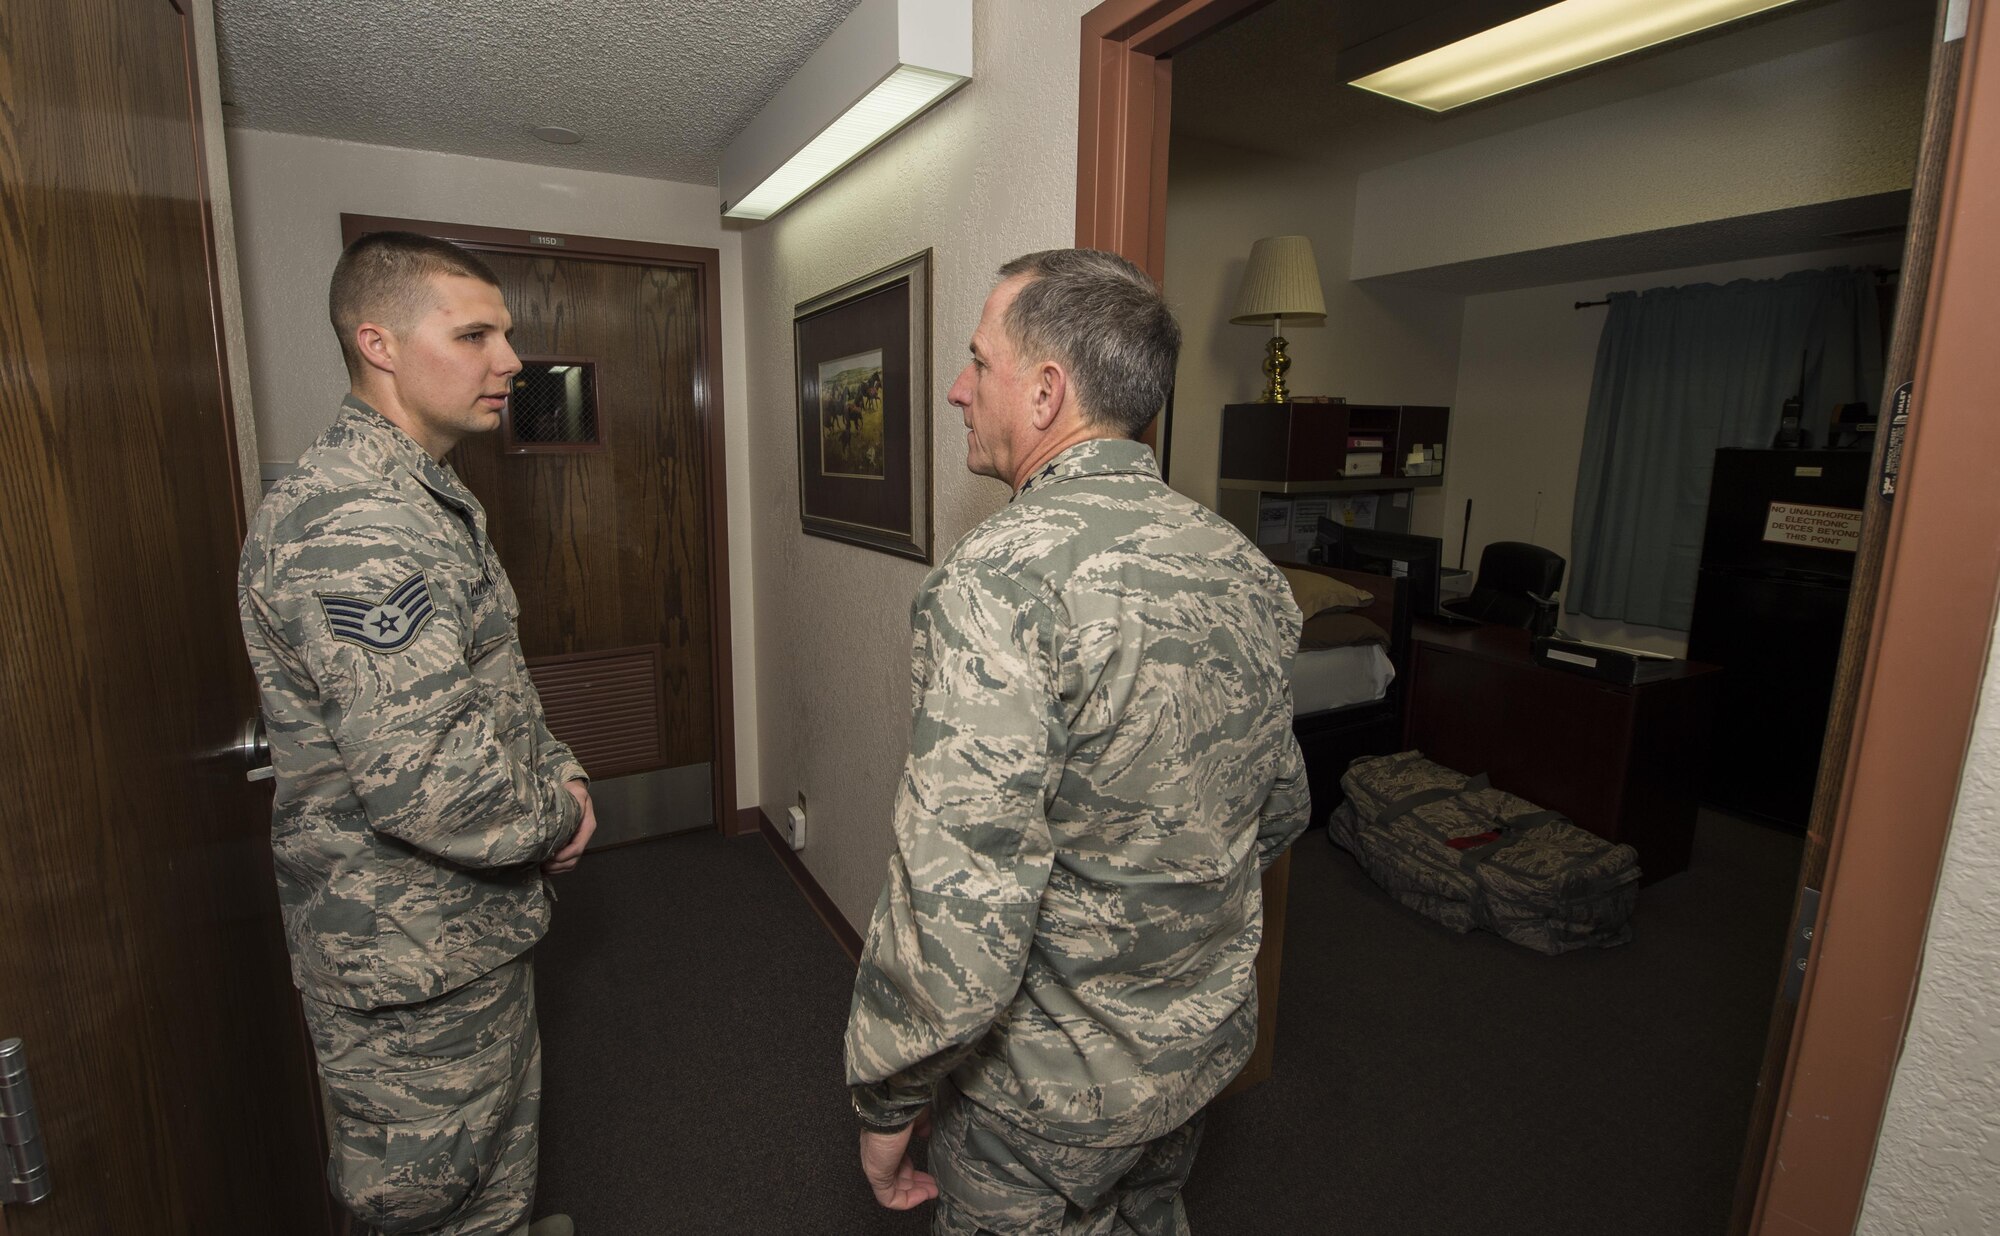 Staff Sgt. Kurtis Wimberly, 319th Missile Squadron facility manager, provides a tour of the missile alert facility to Air Force Chief of Staff Gen. David L. Goldfein during a familiarization tour at a missile alert facility in the 90th Missile Wing missile complex, Dec. 19, 2016. This was Goldfein’s first visit to an ICBM wing as the CSAF. (U.S. Air Force photo by Staff Sgt. Christopher Ruano) 